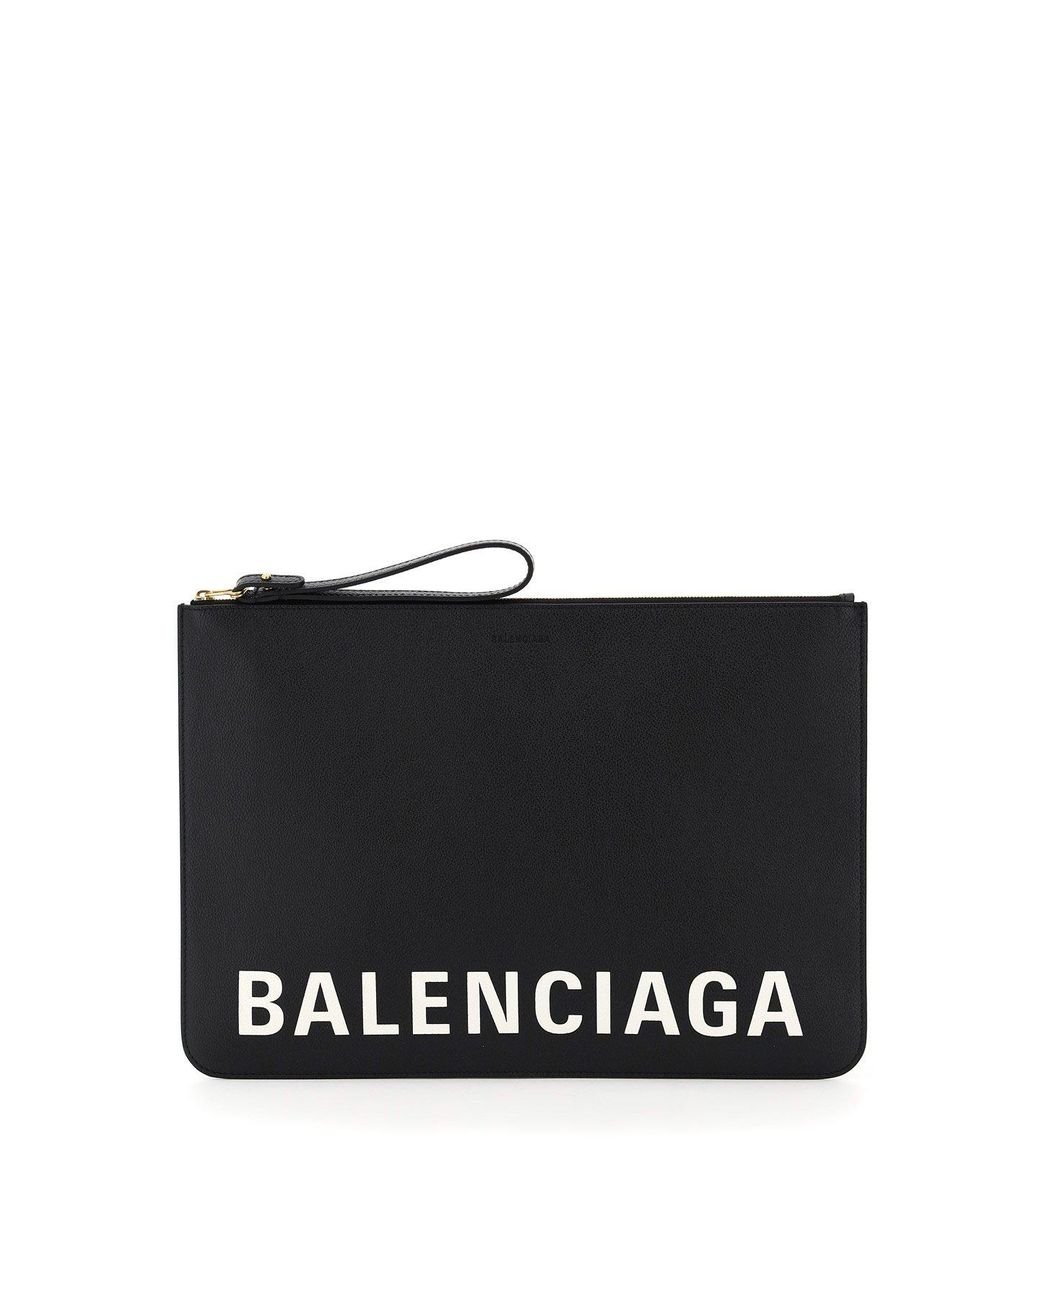 Balenciaga Leather Cash Large Pouch in Black - Save 3% - Lyst